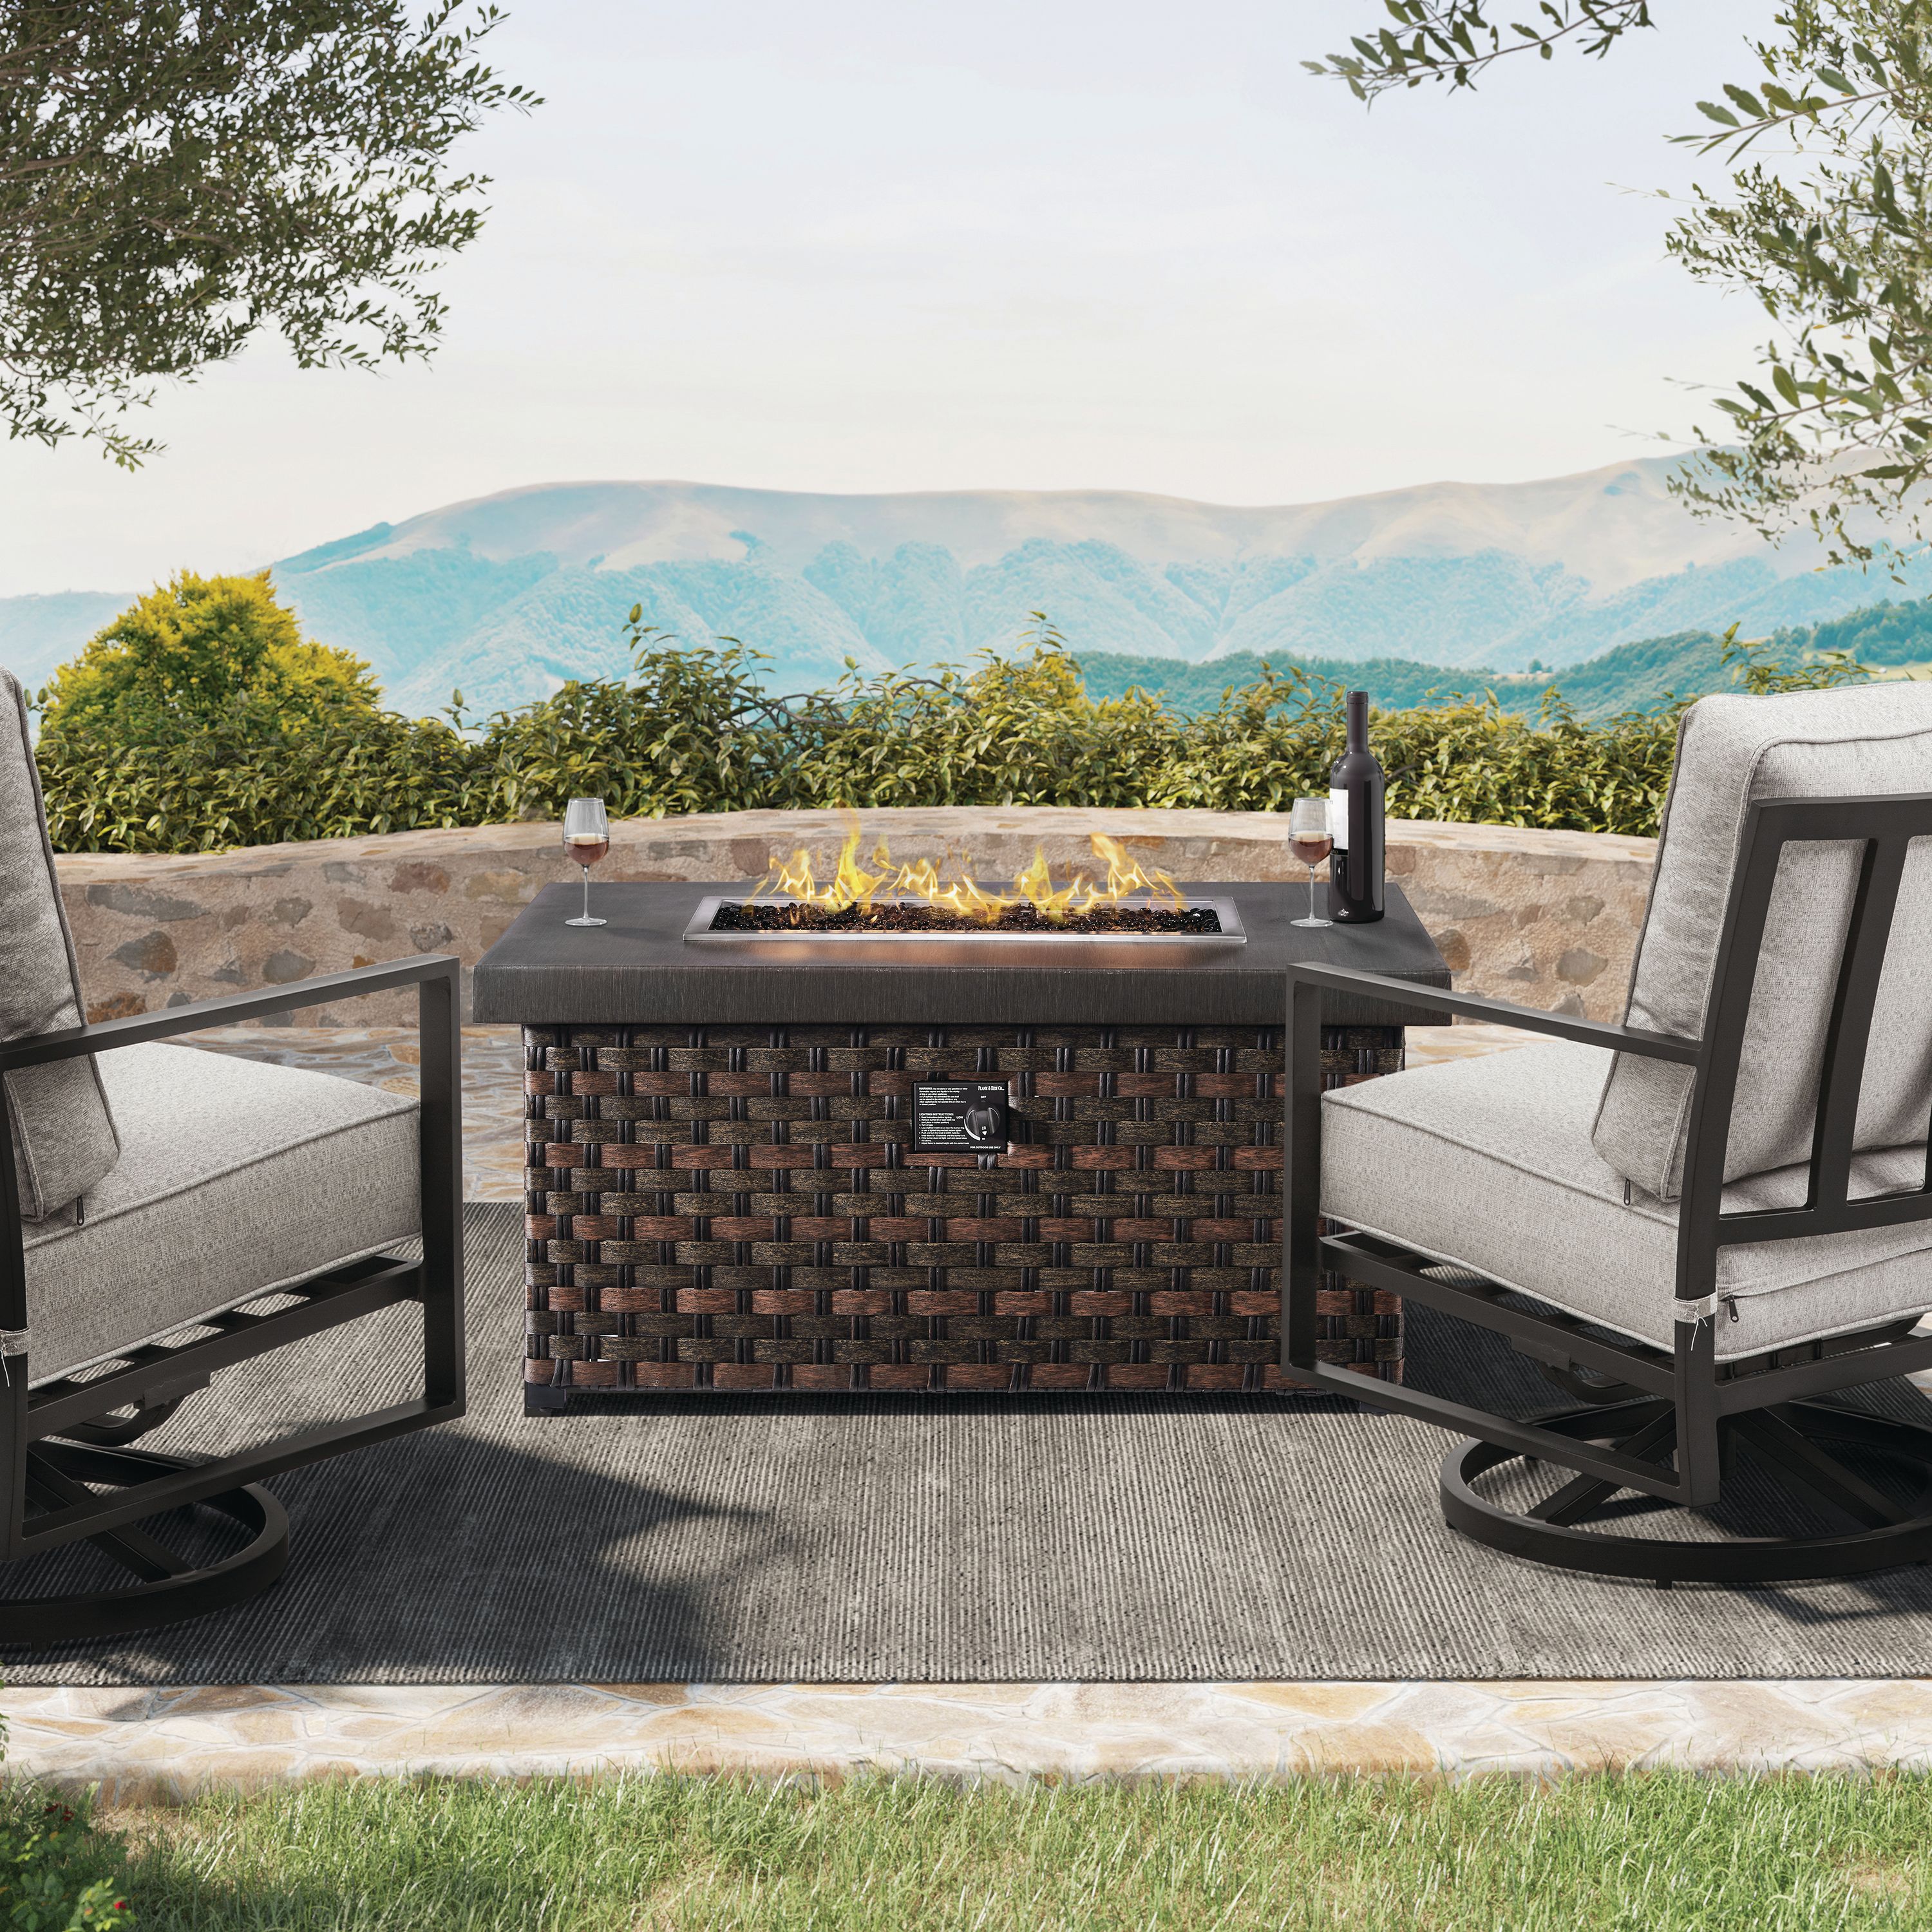 Top 5 Ways to Extend Your Outdoor Living Season